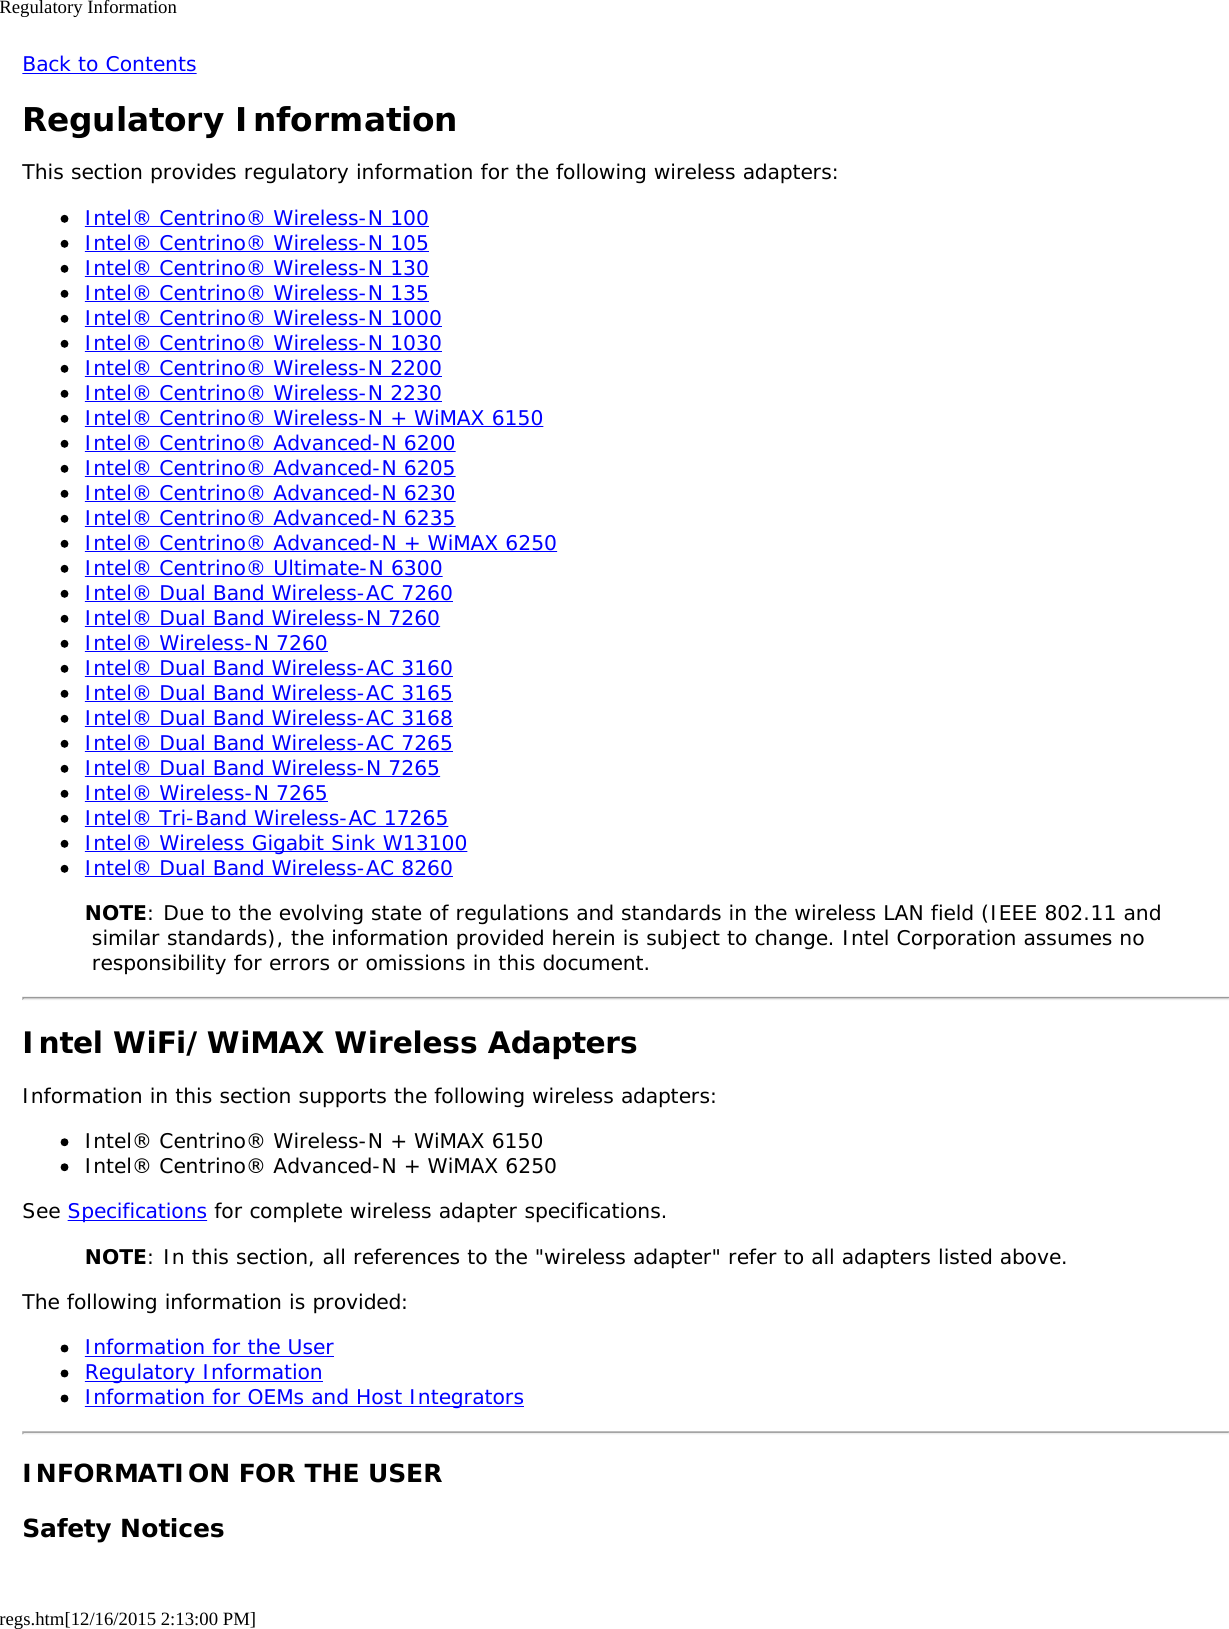 Regulatory Informationregs.htm[12/16/2015 2:13:00 PM]Back to ContentsRegulatory InformationThis section provides regulatory information for the following wireless adapters:Intel® Centrino® Wireless-N 100Intel® Centrino® Wireless-N 105Intel® Centrino® Wireless-N 130Intel® Centrino® Wireless-N 135Intel® Centrino® Wireless-N 1000Intel® Centrino® Wireless-N 1030Intel® Centrino® Wireless-N 2200Intel® Centrino® Wireless-N 2230Intel® Centrino® Wireless-N + WiMAX 6150Intel® Centrino® Advanced-N 6200Intel® Centrino® Advanced-N 6205Intel® Centrino® Advanced-N 6230Intel® Centrino® Advanced-N 6235Intel® Centrino® Advanced-N + WiMAX 6250Intel® Centrino® Ultimate-N 6300Intel® Dual Band Wireless-AC 7260Intel® Dual Band Wireless-N 7260Intel® Wireless-N 7260Intel® Dual Band Wireless-AC 3160Intel® Dual Band Wireless-AC 3165Intel® Dual Band Wireless-AC 3168Intel® Dual Band Wireless-AC 7265Intel® Dual Band Wireless-N 7265Intel® Wireless-N 7265Intel® Tri-Band Wireless-AC 17265Intel® Wireless Gigabit Sink W13100Intel® Dual Band Wireless-AC 8260NOTE: Due to the evolving state of regulations and standards in the wireless LAN field (IEEE 802.11 and similar standards), the information provided herein is subject to change. Intel Corporation assumes no responsibility for errors or omissions in this document.Intel WiFi/WiMAX Wireless AdaptersInformation in this section supports the following wireless adapters:Intel® Centrino® Wireless-N + WiMAX 6150Intel® Centrino® Advanced-N + WiMAX 6250See Specifications for complete wireless adapter specifications.NOTE: In this section, all references to the &quot;wireless adapter&quot; refer to all adapters listed above.The following information is provided:Information for the UserRegulatory InformationInformation for OEMs and Host IntegratorsINFORMATION FOR THE USERSafety Notices